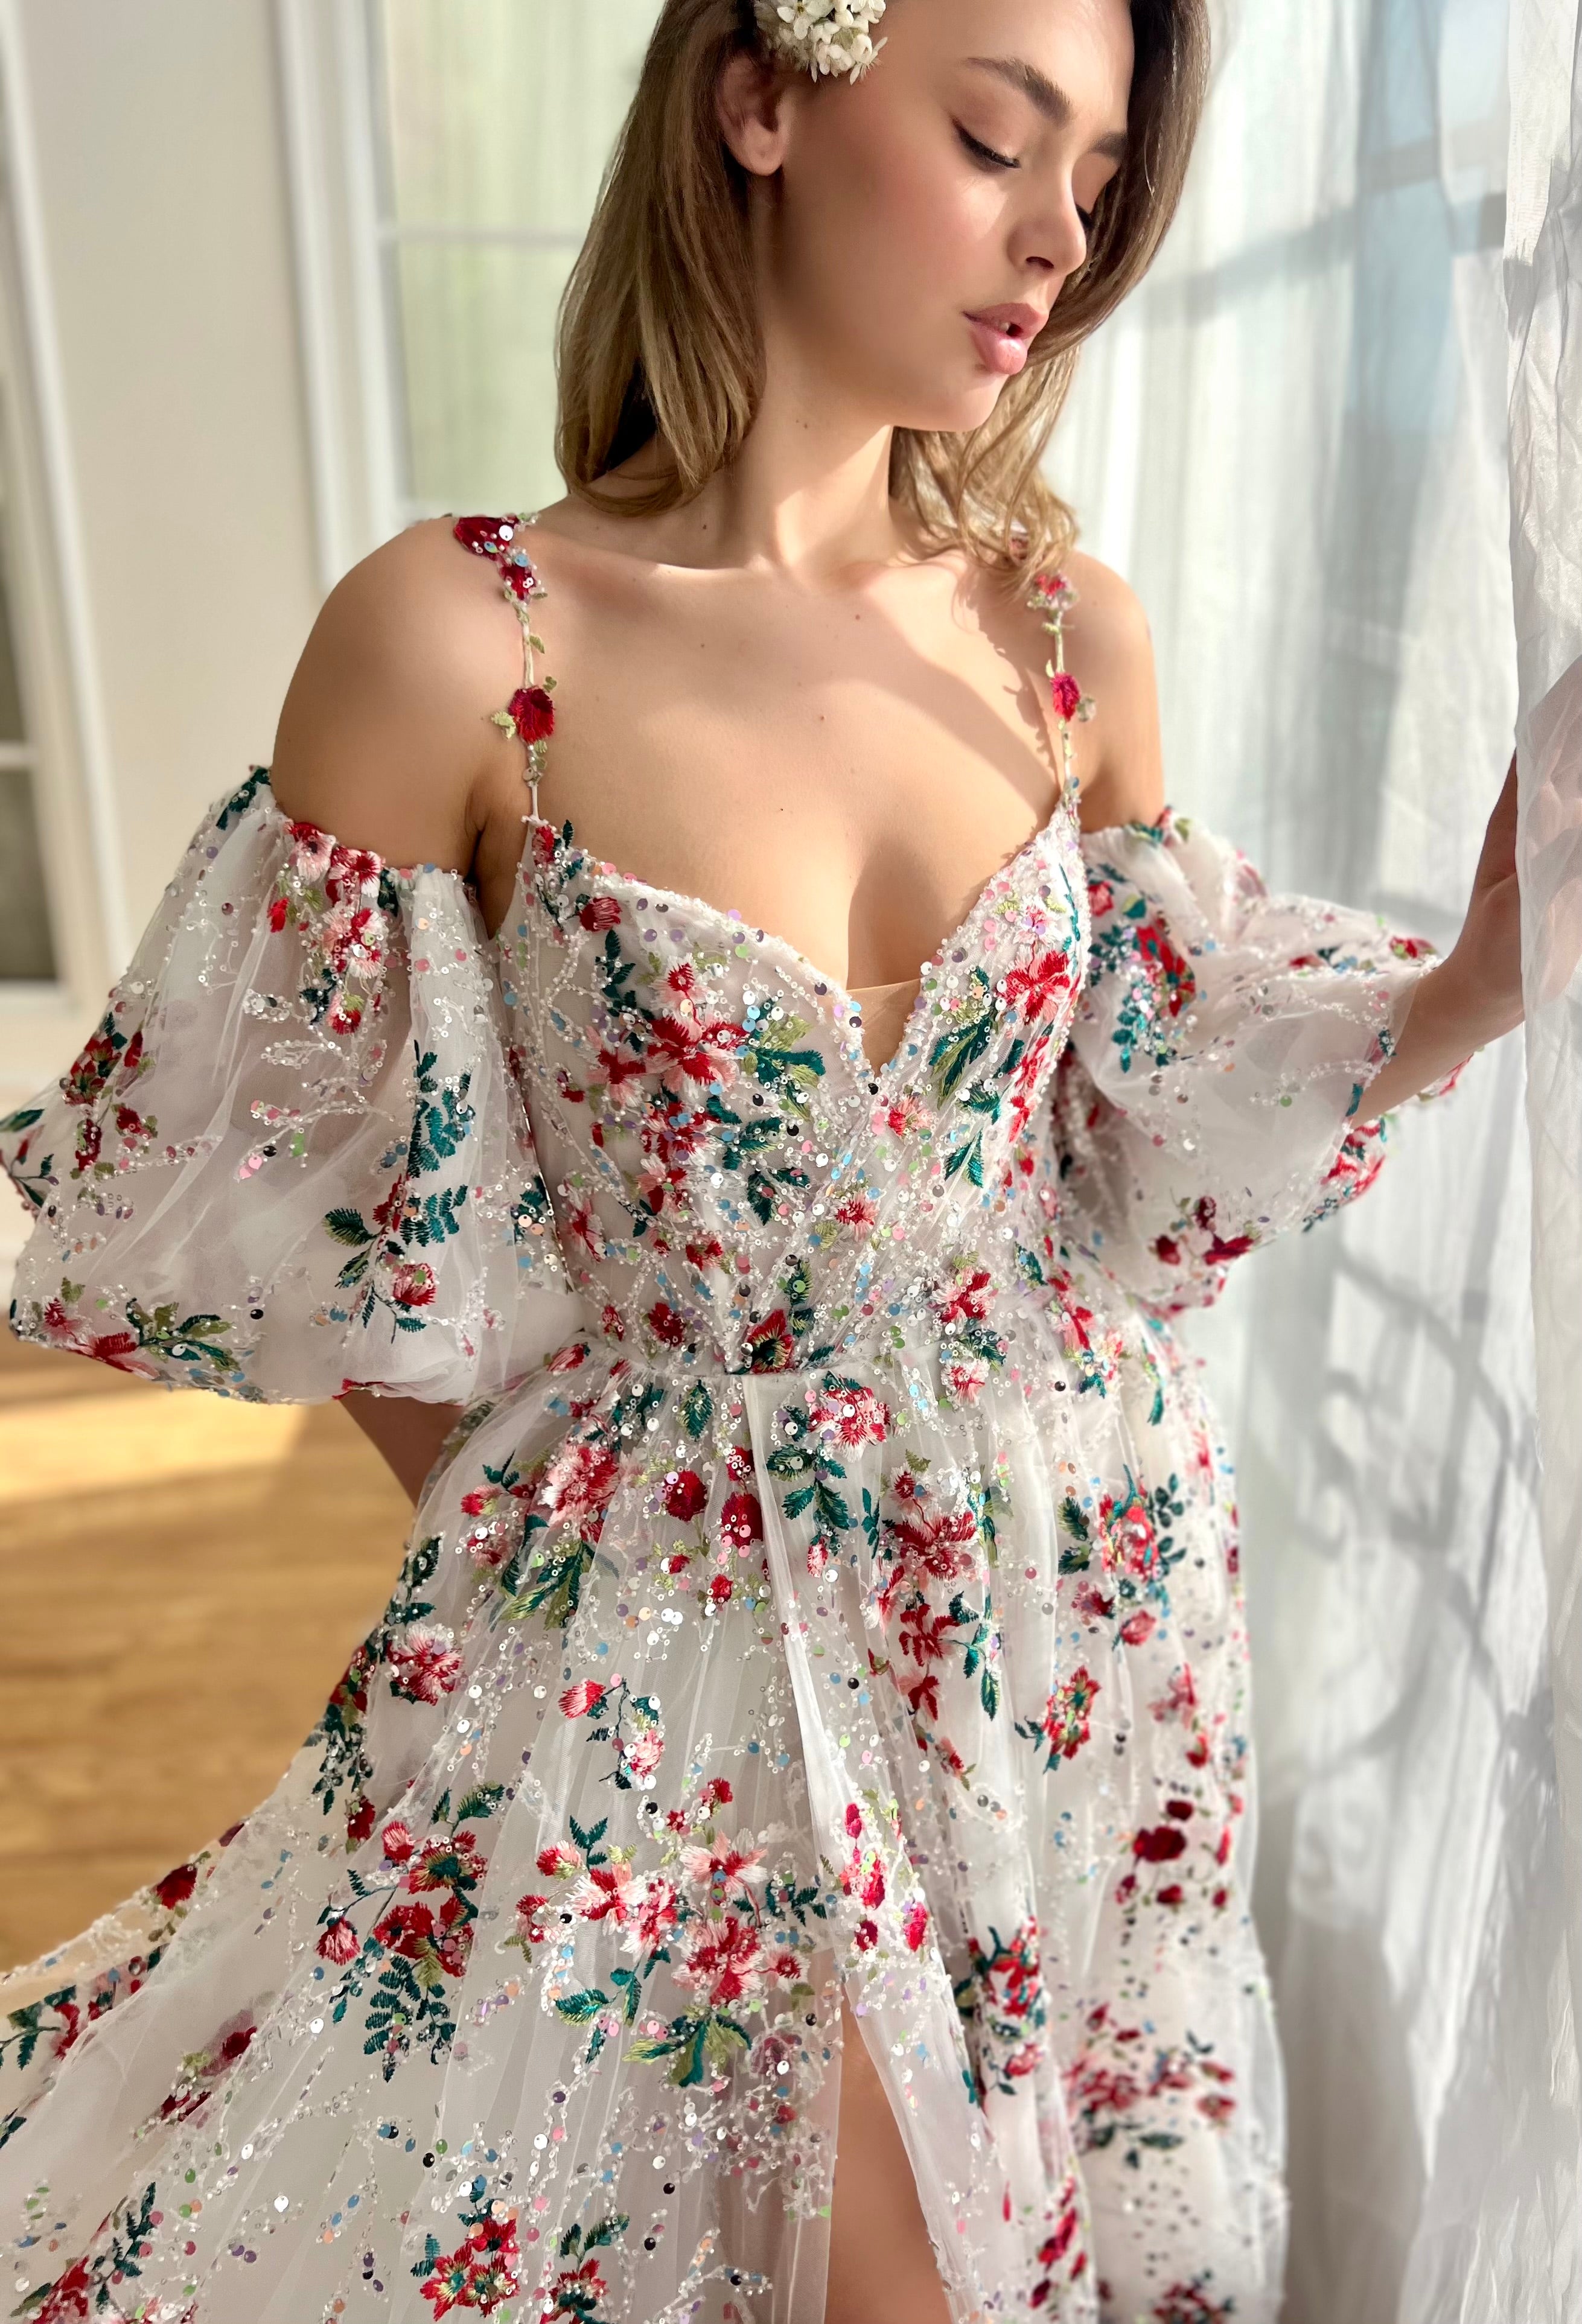 White A-Line dress with spaghetti straps, off the shoulder sleeves and embroidery